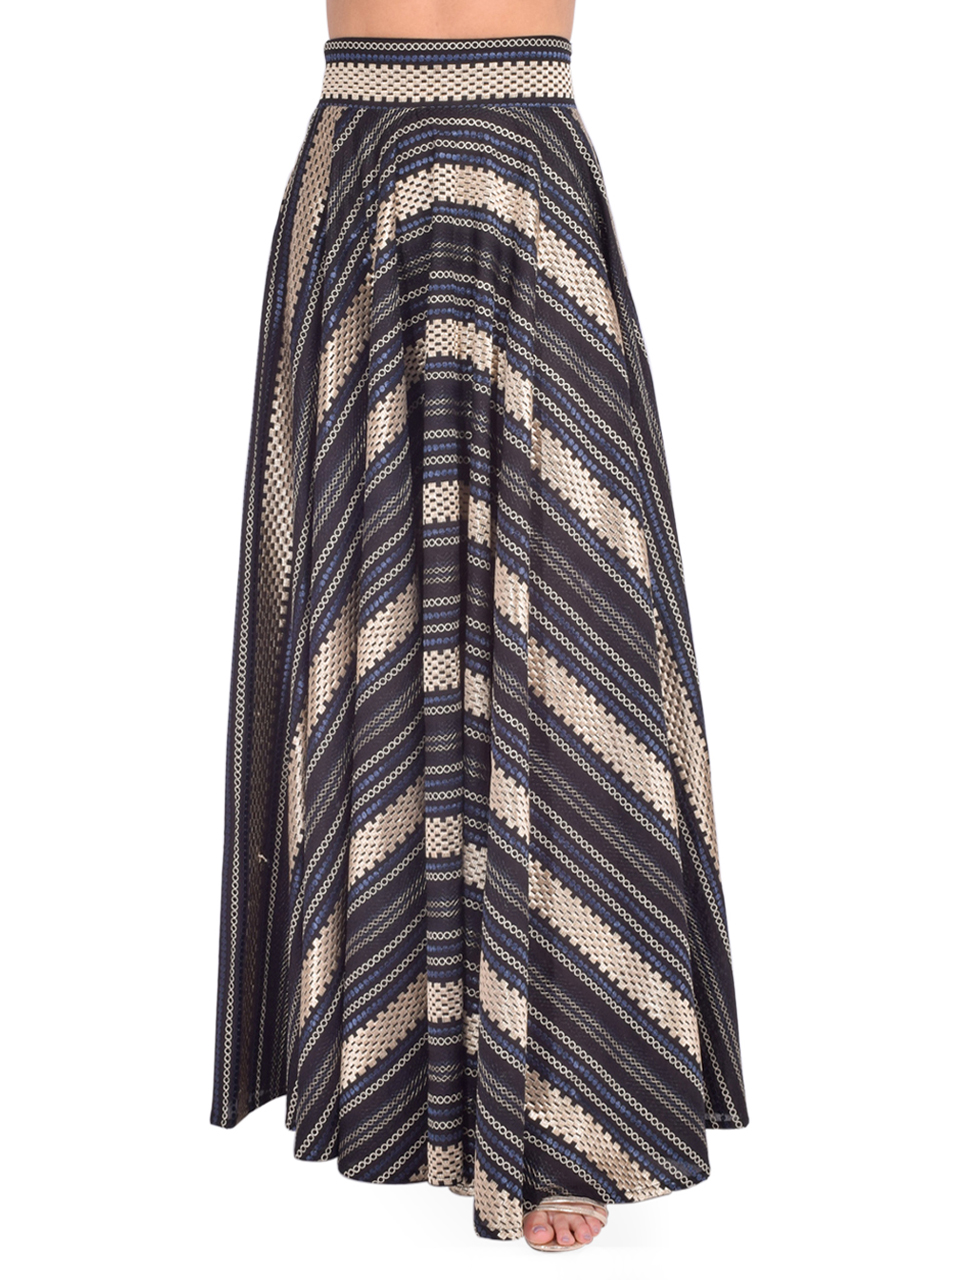 LACE Maxi Skirt in Black/Gold/Navy Stripe Front View 